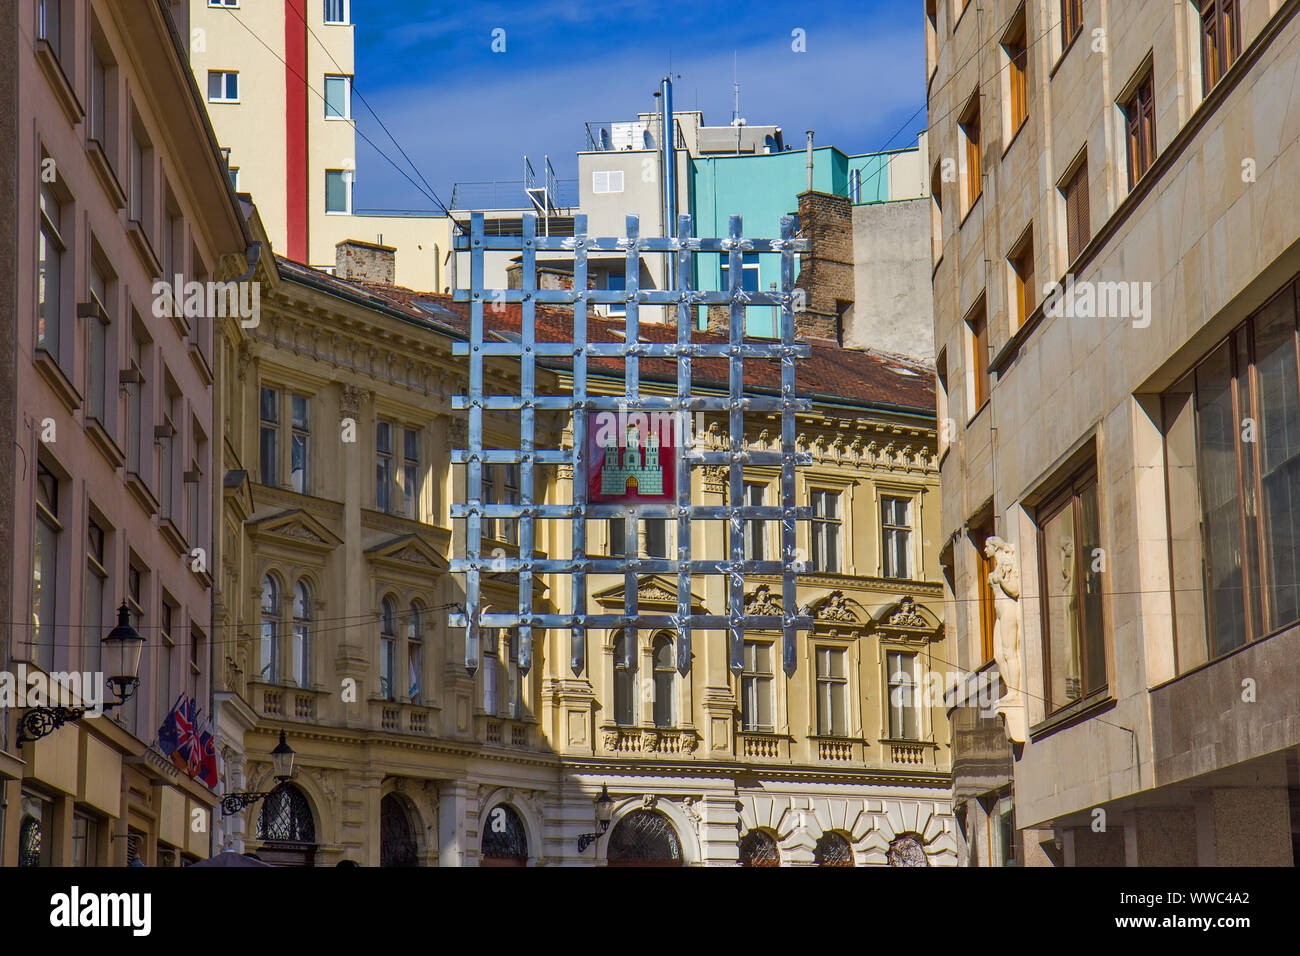 Coat of arms of the city - Street view of downtown in Bratislava, Slovakia Stock Photo